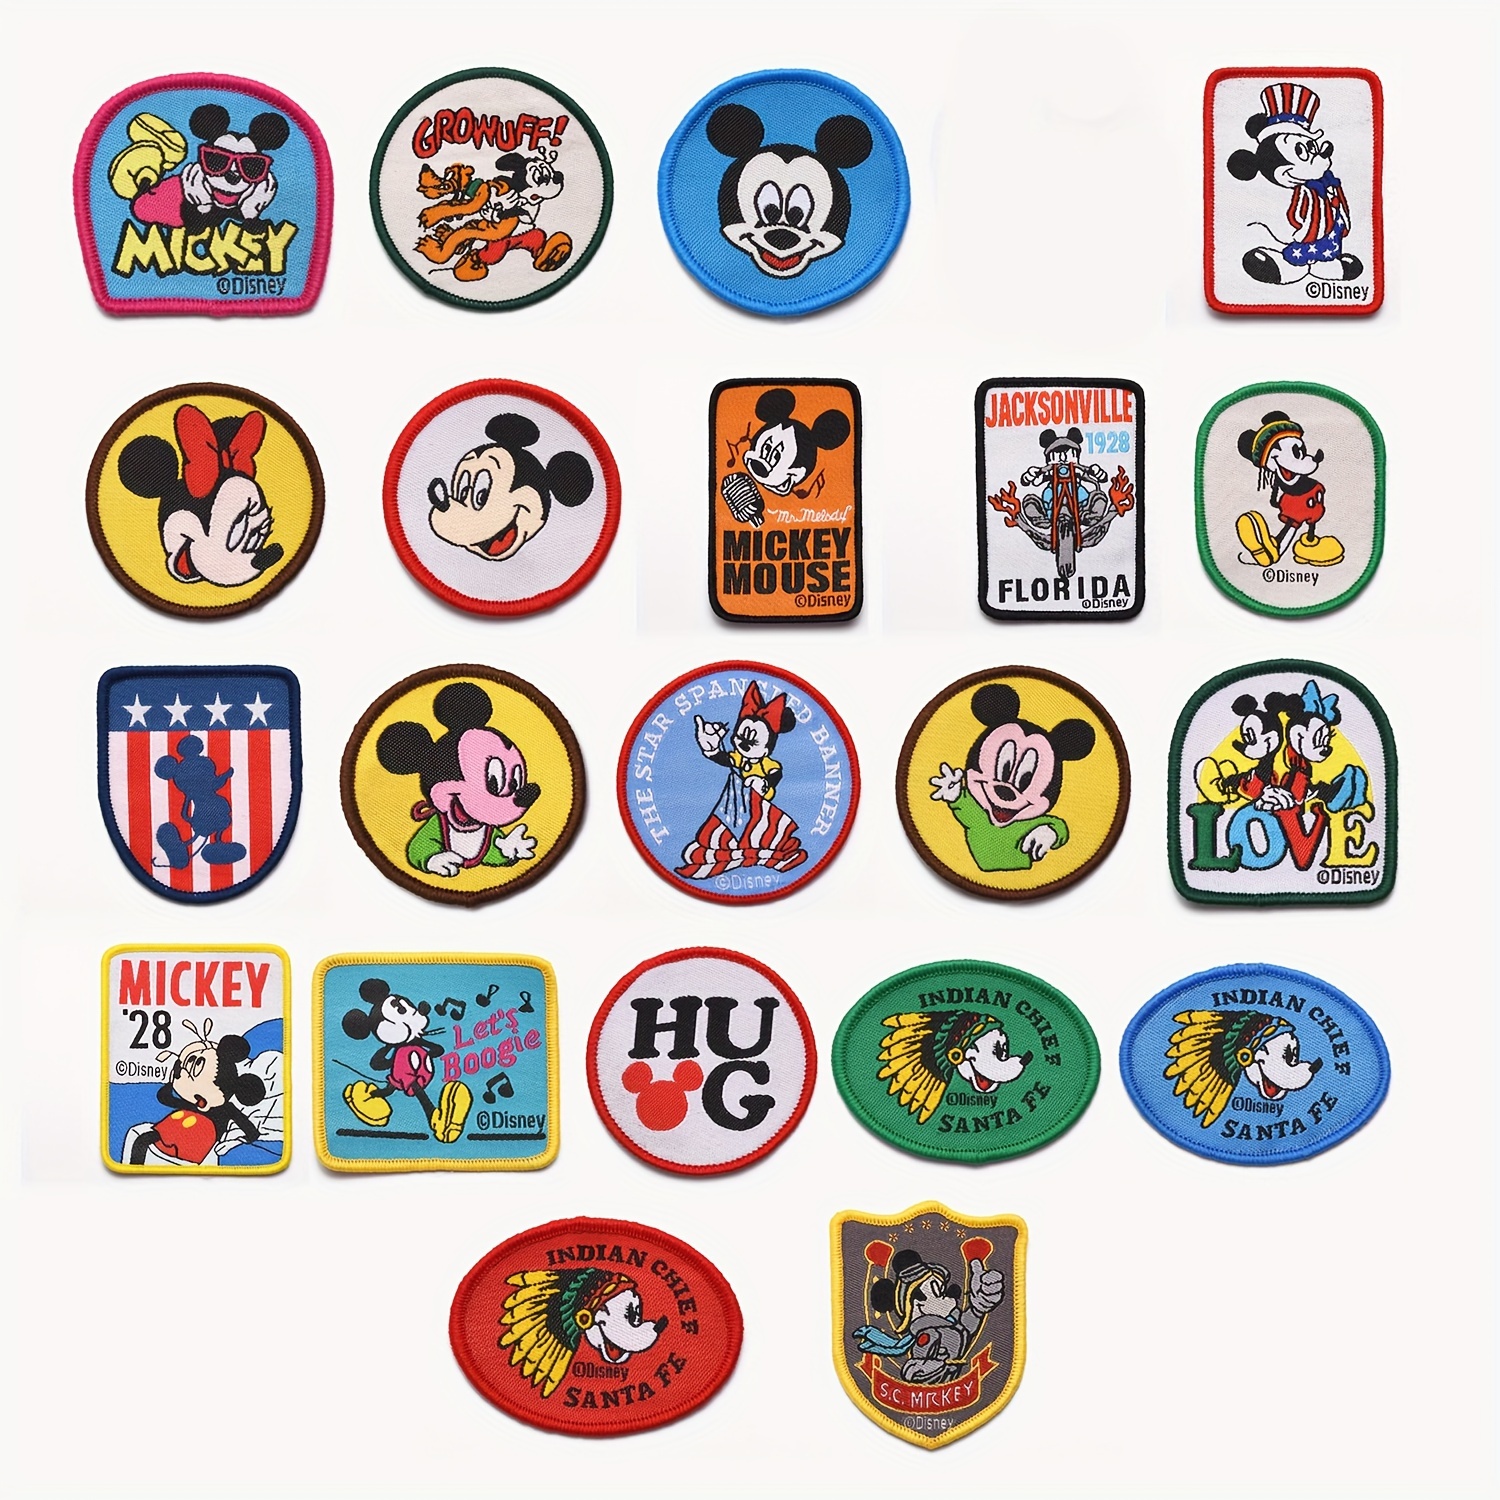 

21pc Disney Embroidery Patches Set, Iron-on Embellishments, Cartoon Character Appliques For Clothing, Bags & Diy Crafts